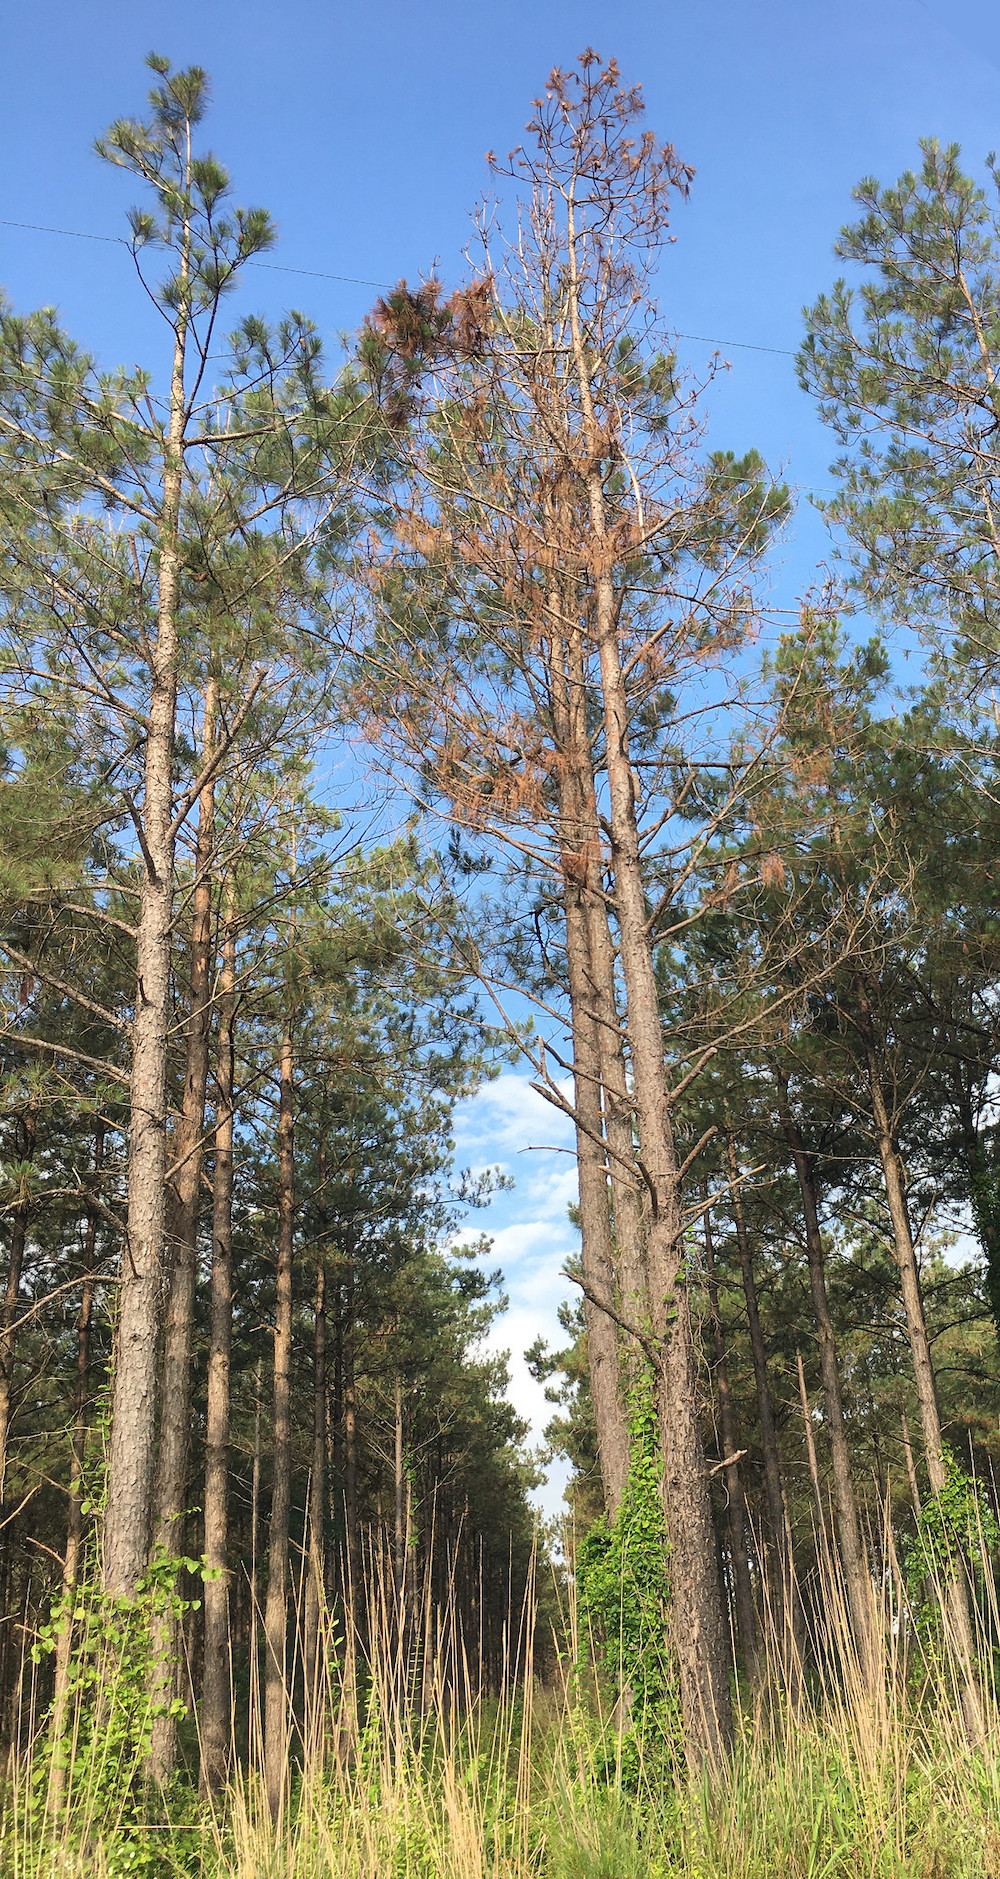 Researchers turn to AI, remote sensing to find cause of pine declines